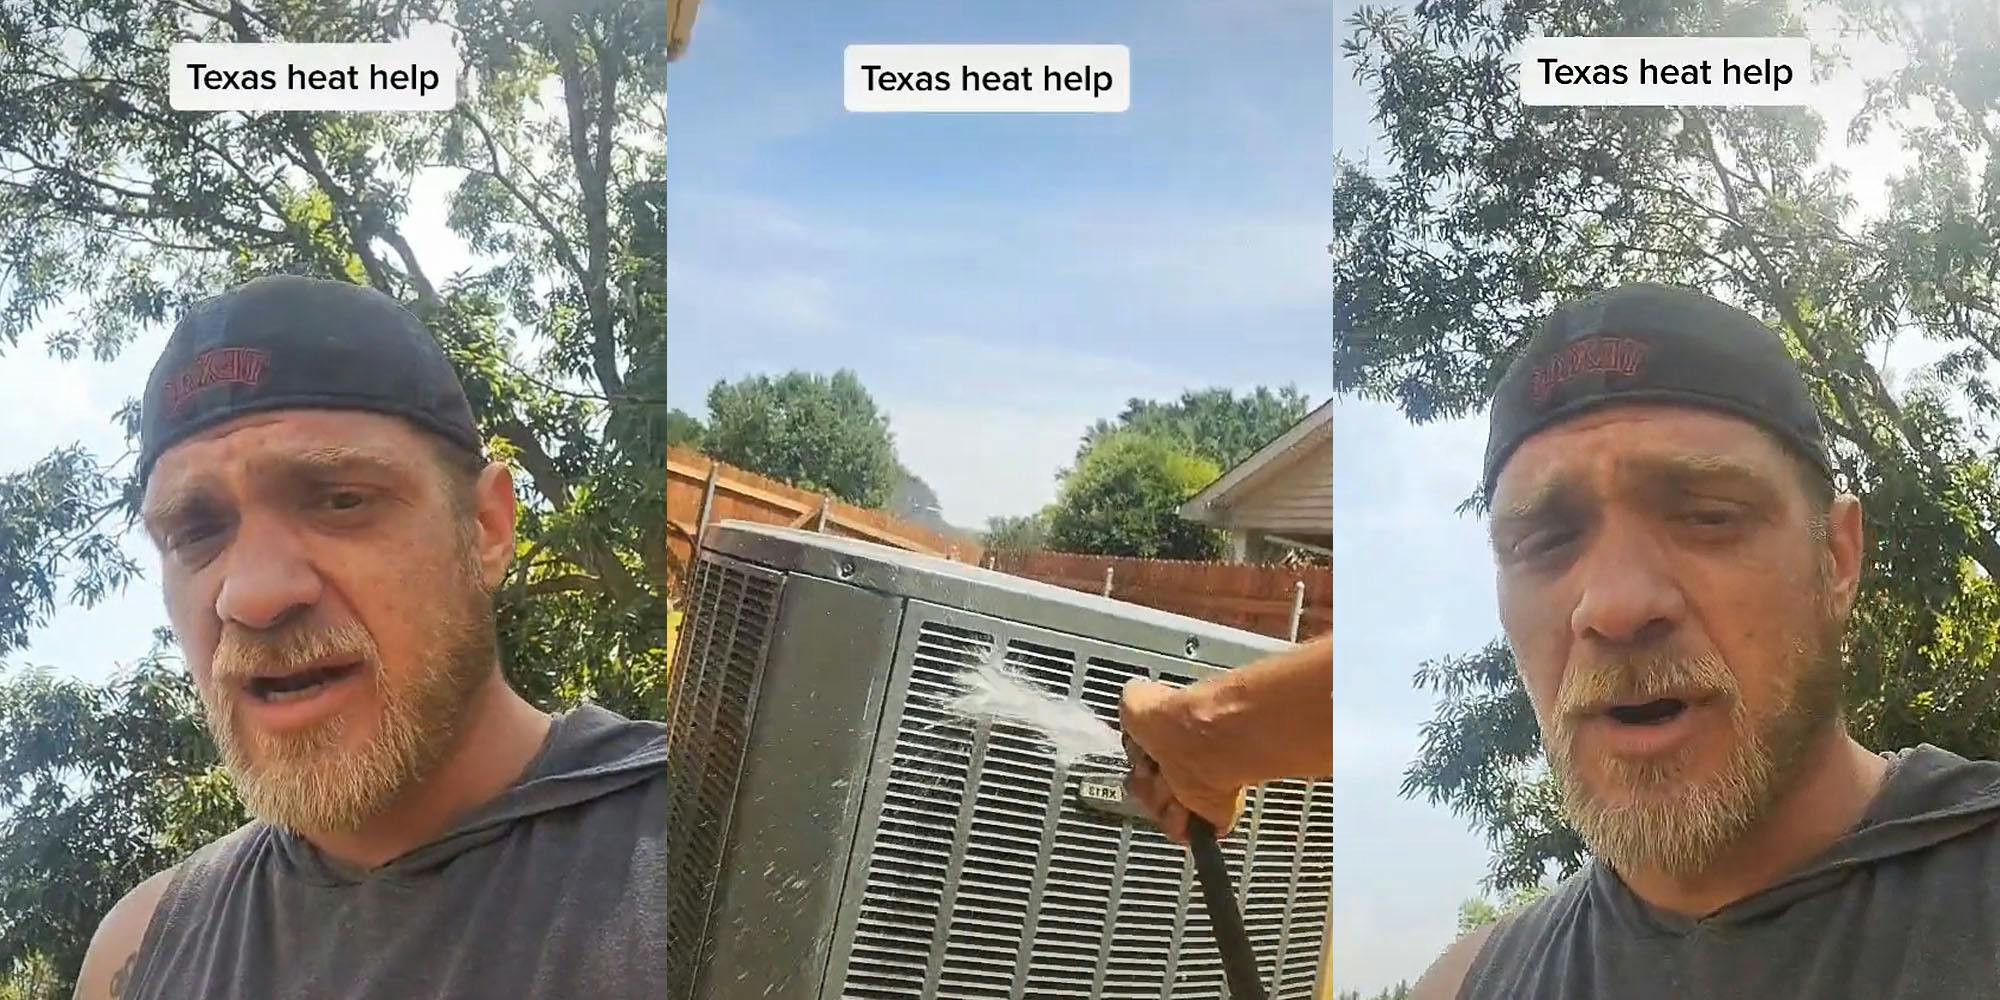 TikTok's Trick Makes It Easy To Add A Portable AC Unit To Casement